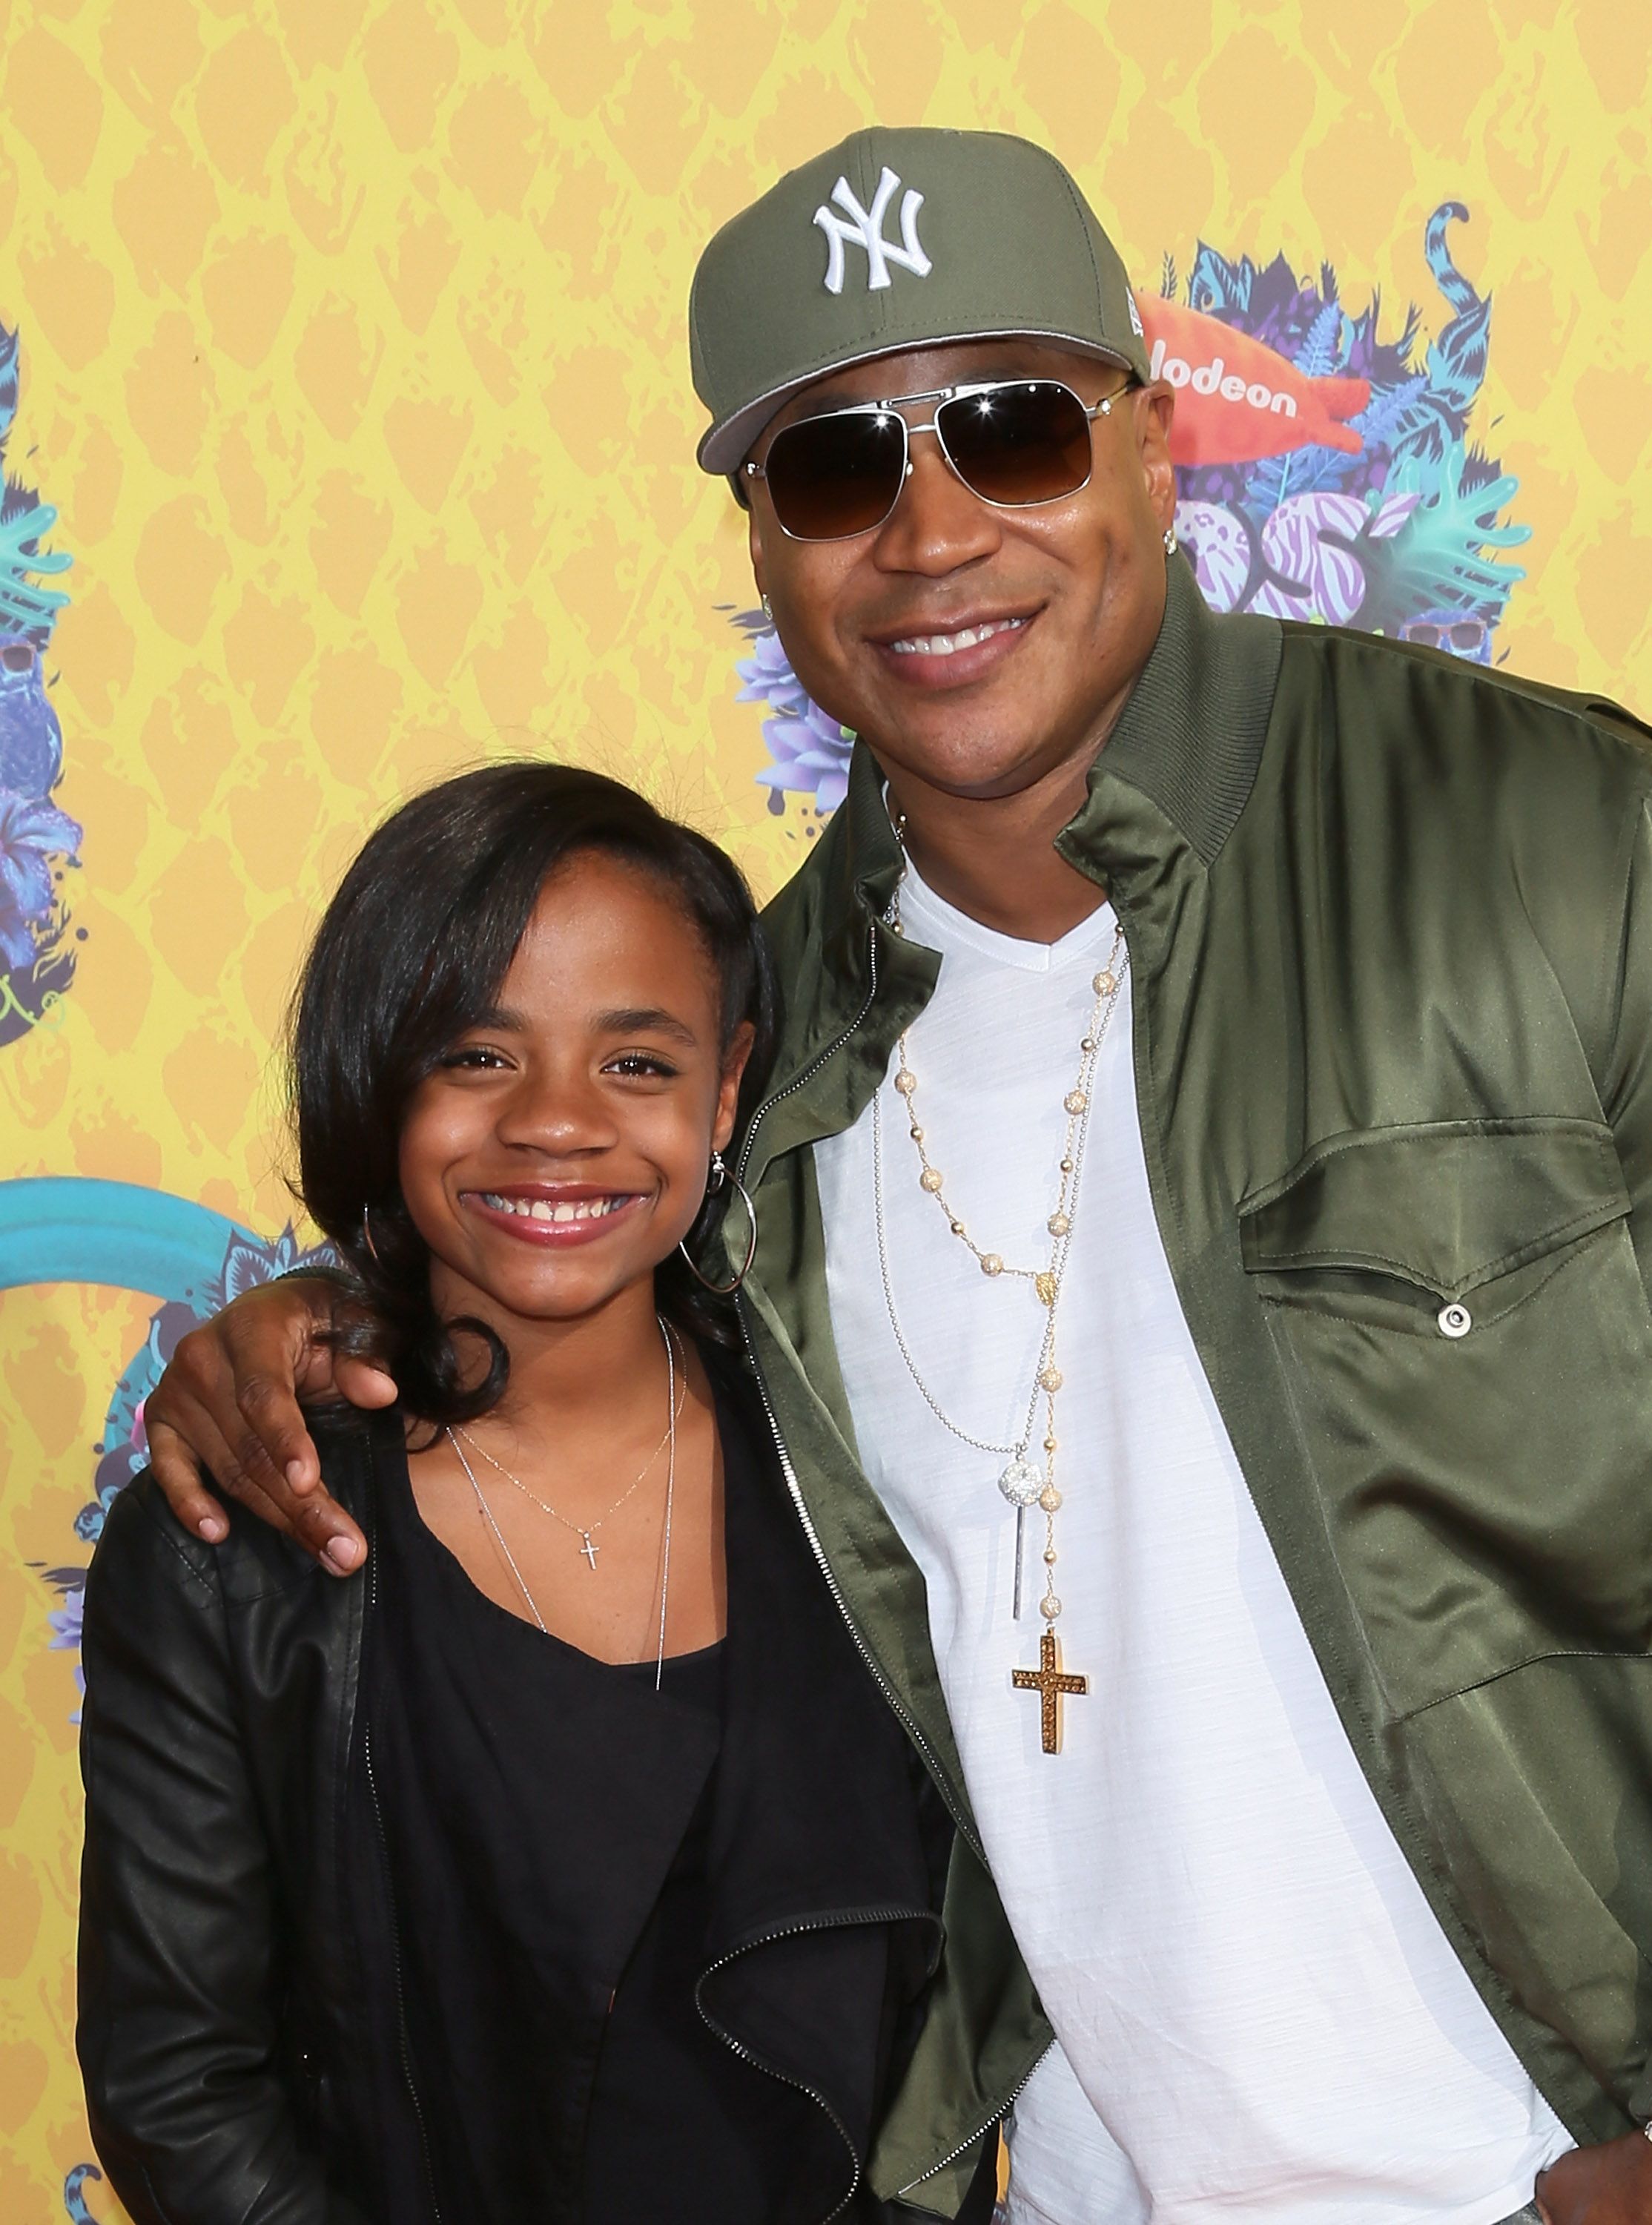 LL Cool J and Nina Simone Smith during the Nickelodeon's 27th Annual Kids' Choice Awards at USC Galen Center on March 29, 2014 in Los Angeles, California. | Source: Getty Images